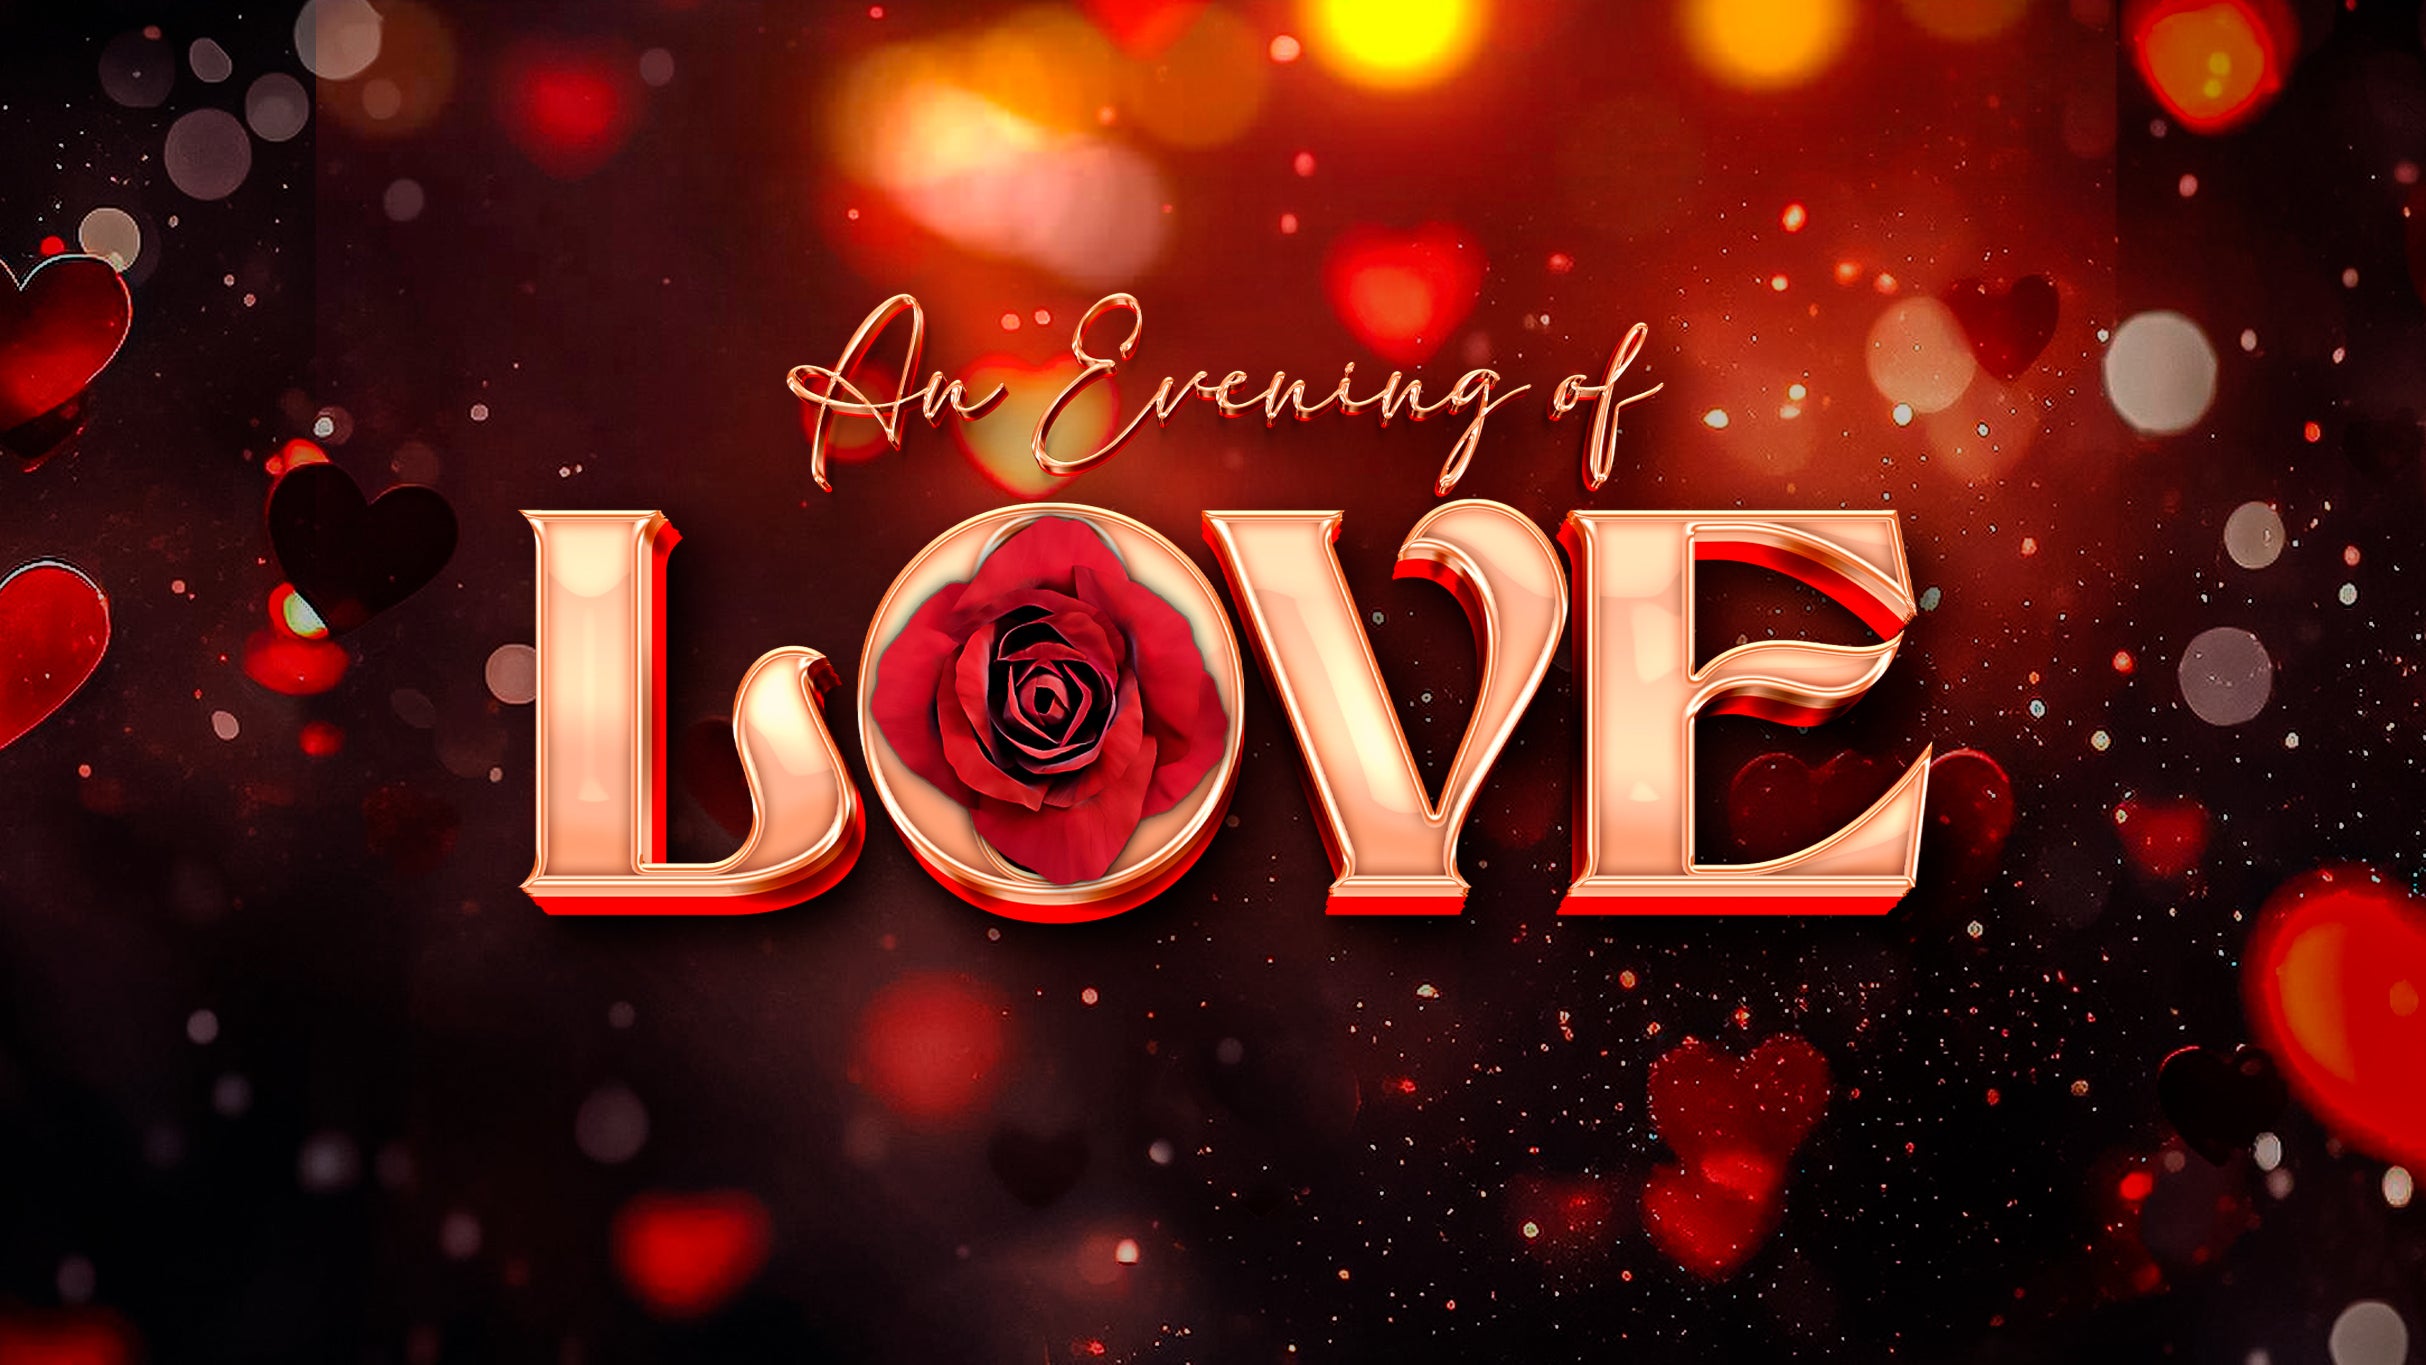 An Evening of Love free presale pasword for early tickets in Miami